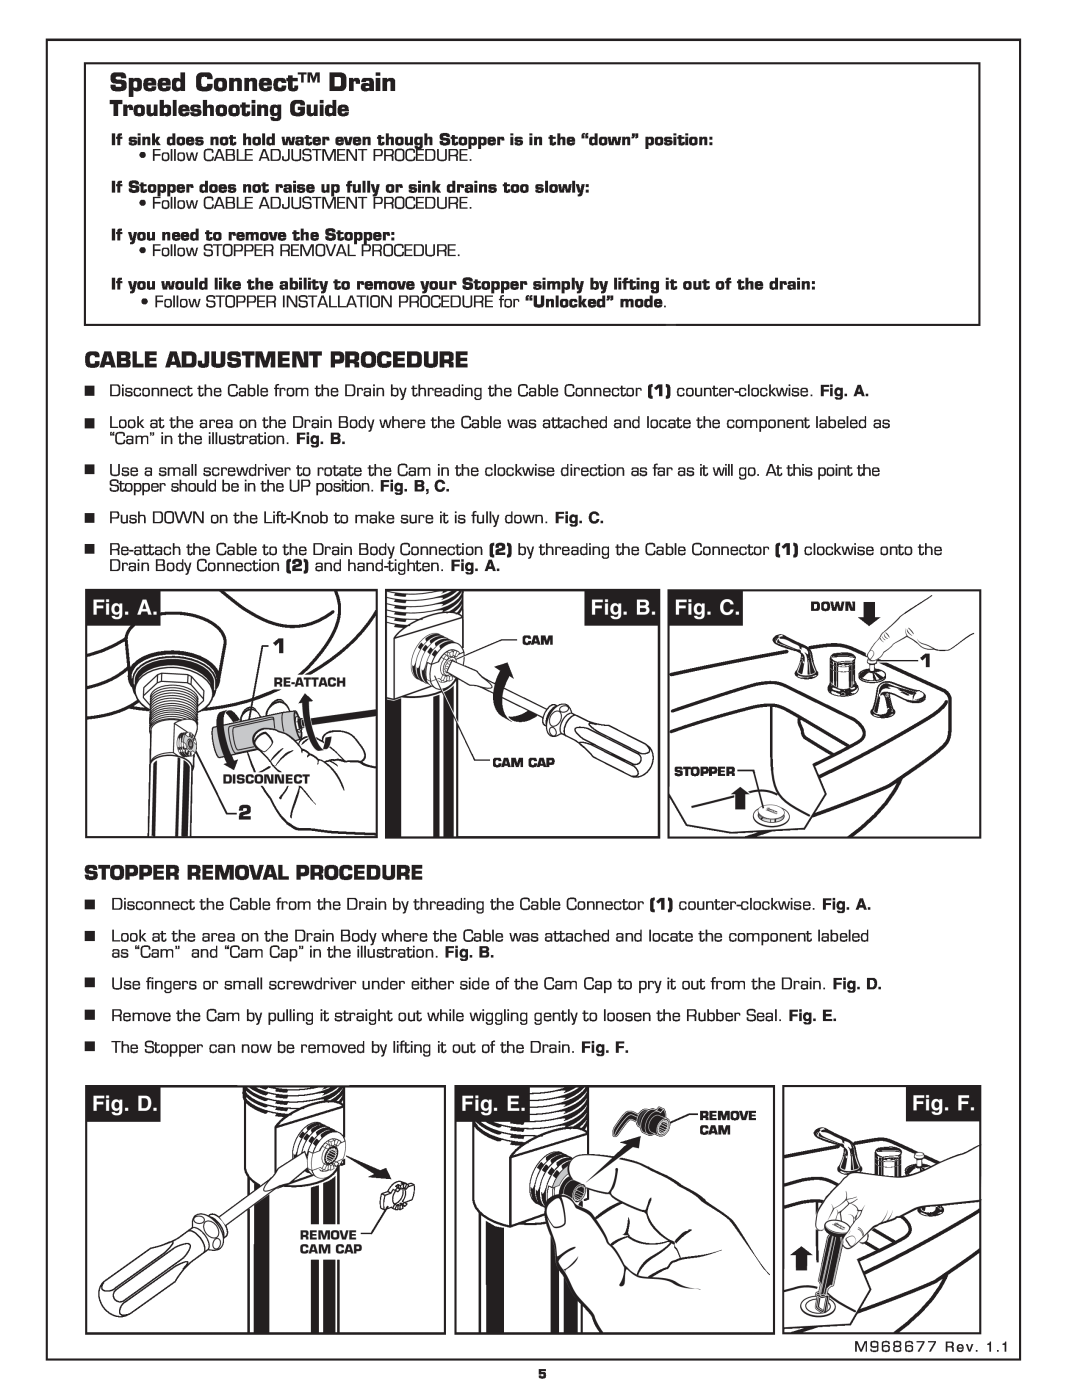 American Standard 3475.5 Troubleshooting Guide, Cable Adjustment Procedure, Fig. A, Fig. B, Fig. C, Fig. D, Fig. E, Fig. F 